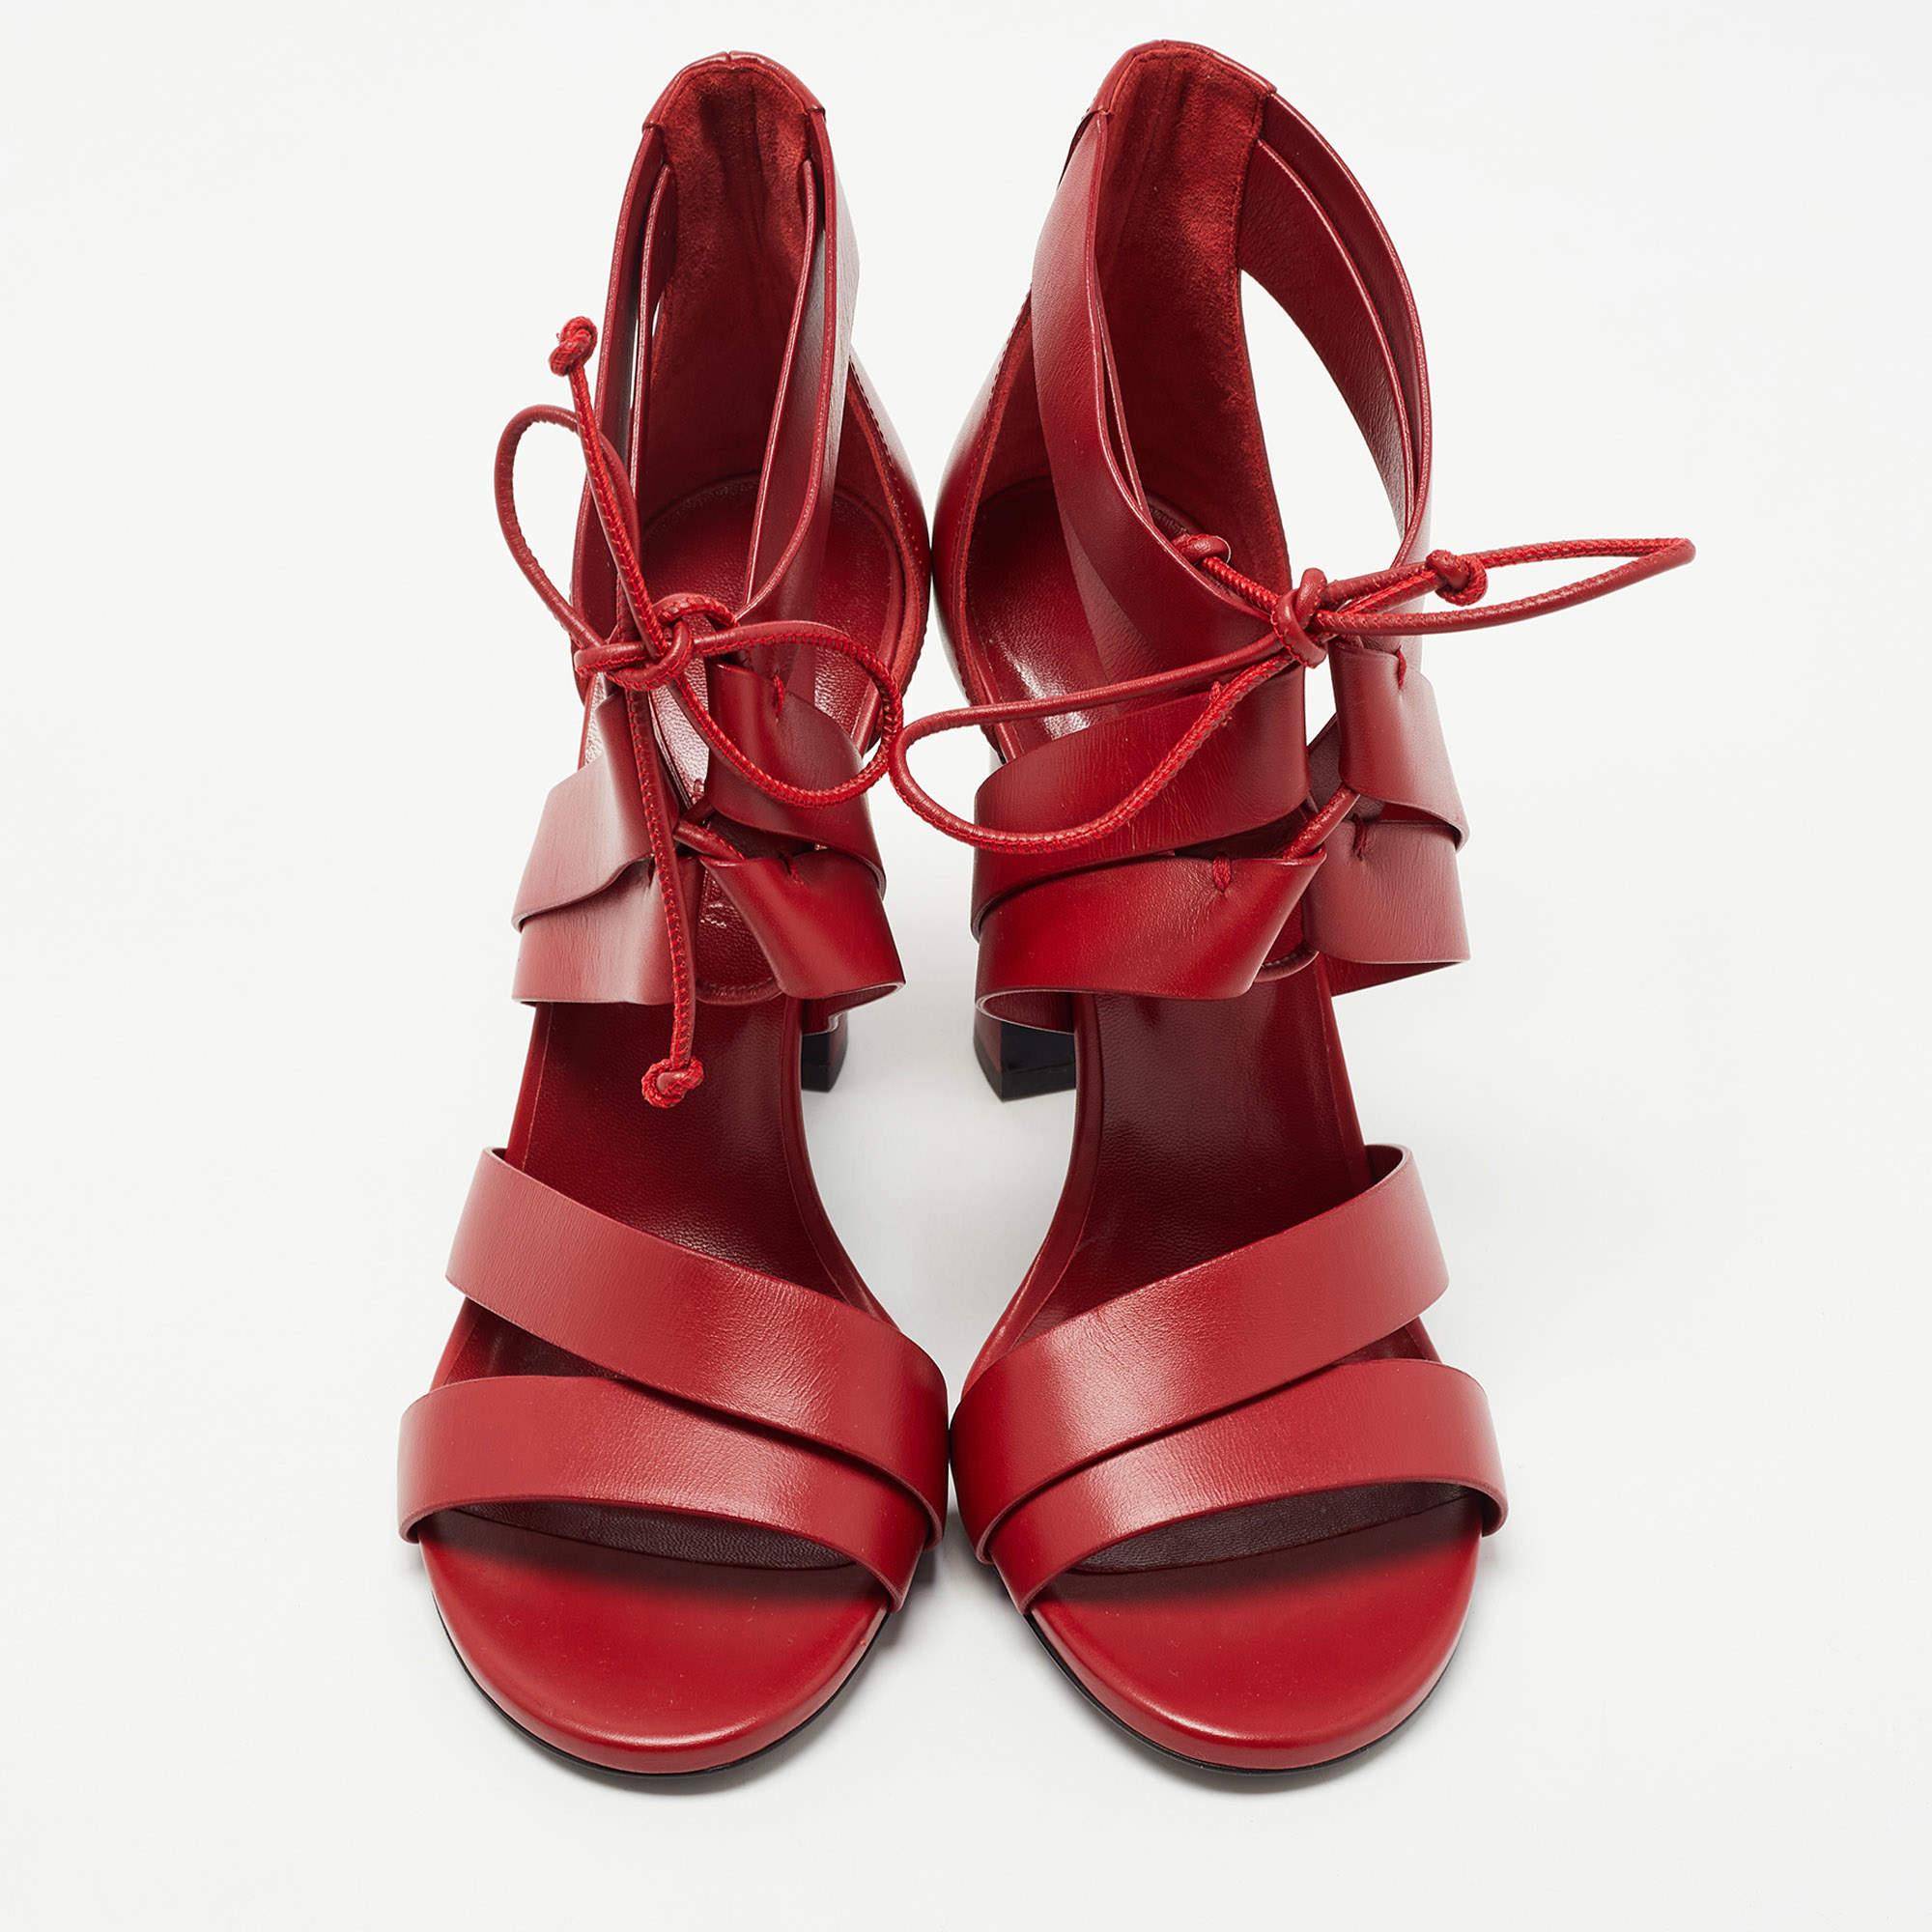 Hermes Red Leather Ankle Strap Sandals Size 38 2